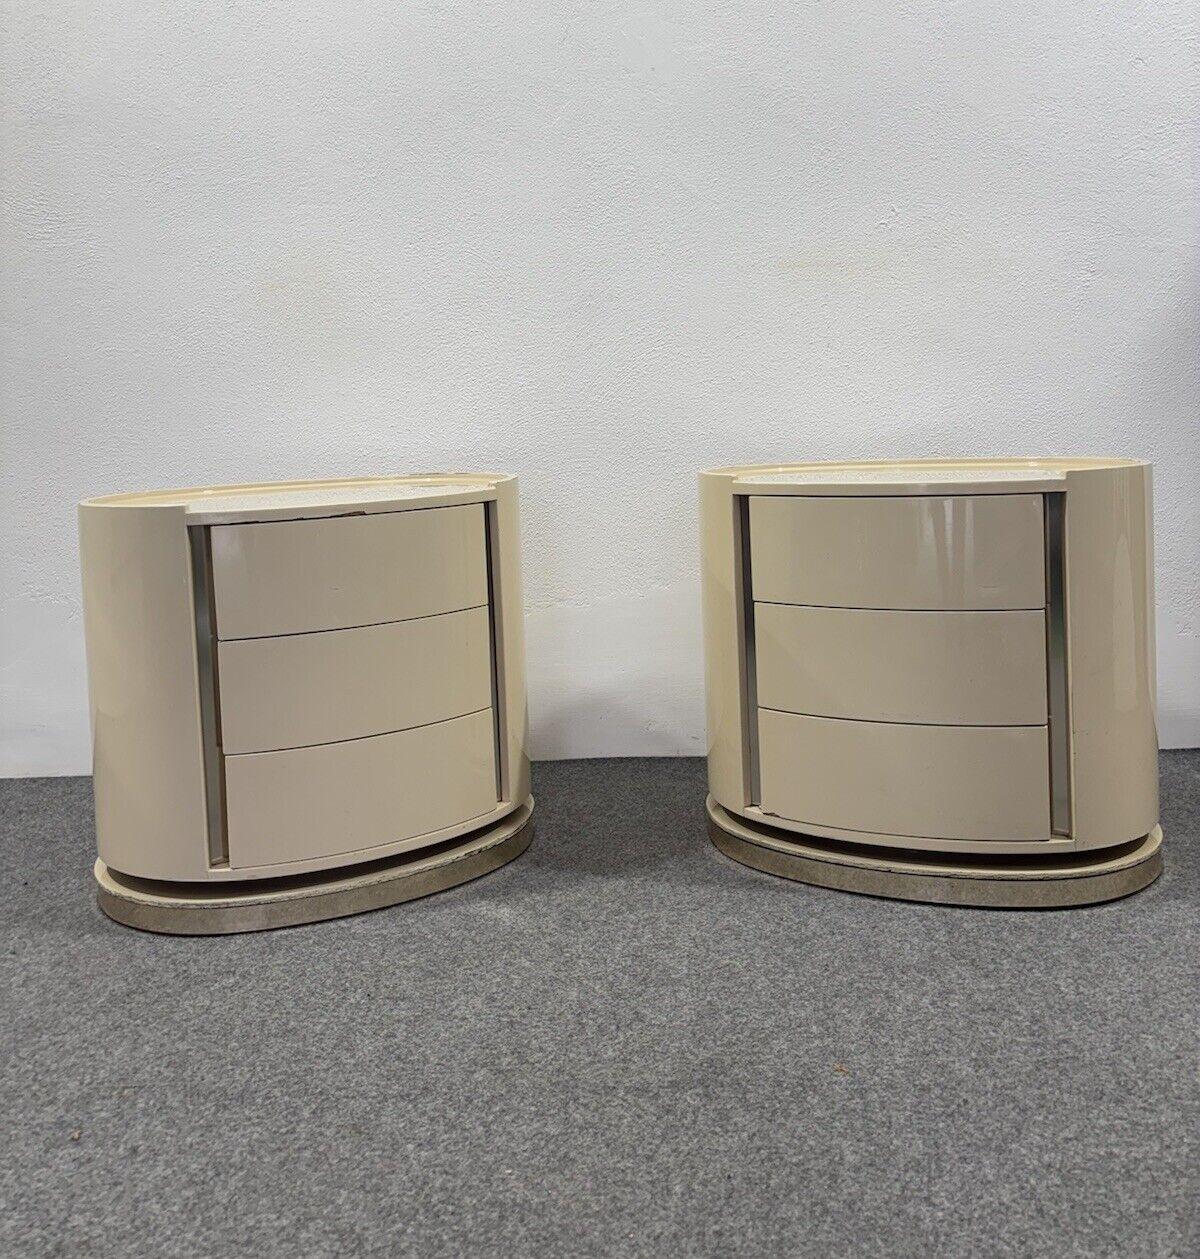 Karl Springer Style Pair of bedside tables space Agedesign Modernism 1970's.

Full lacquered wood frame, chrome-plated steel details.

Item is in good conservative condition, no structural defects to report, present signs of time due to use and